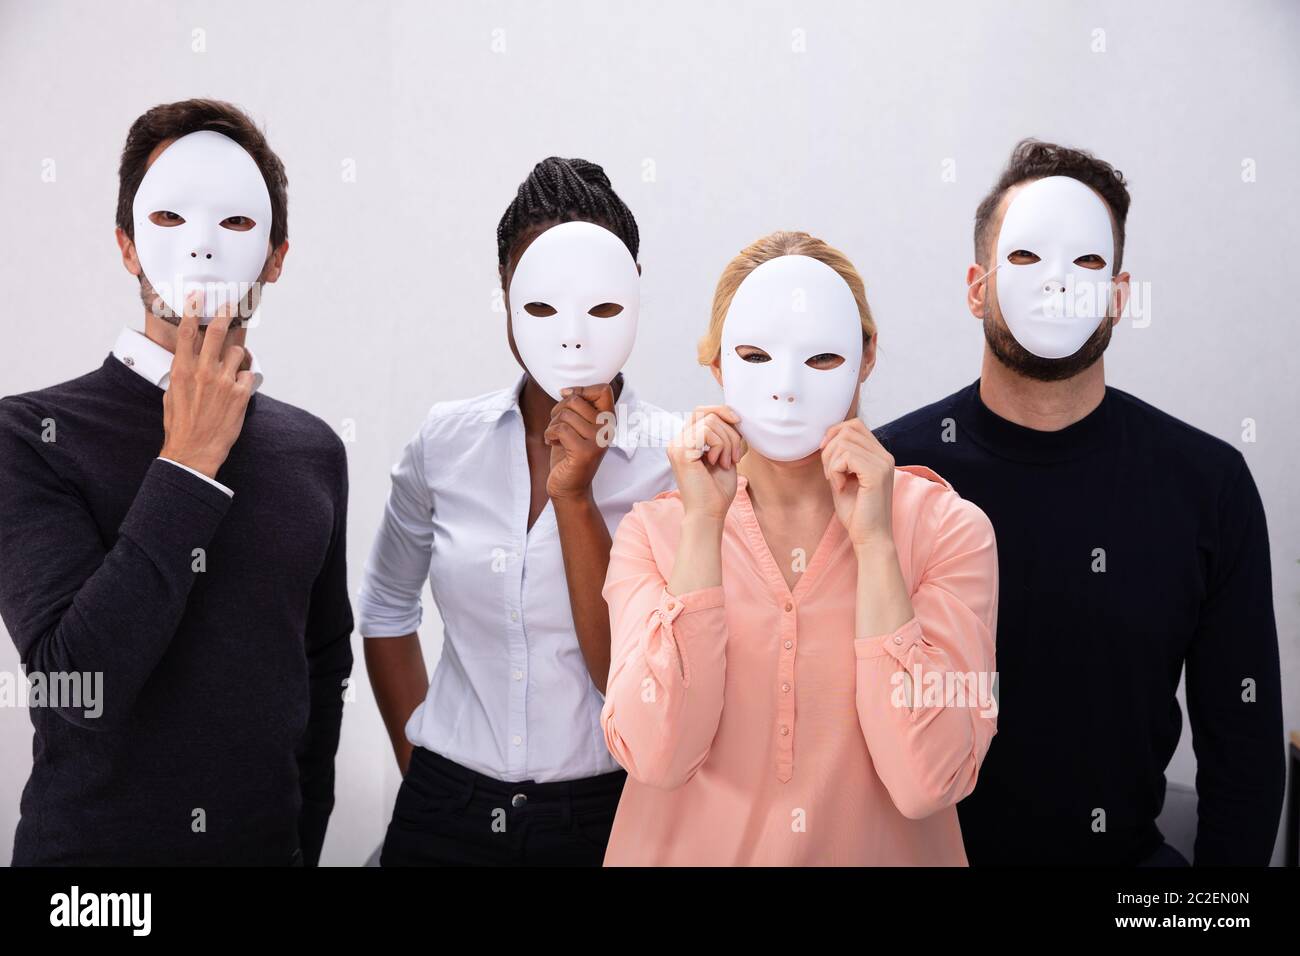 Group Of People Standing Together Covering His Face With White Masks Stock Photo